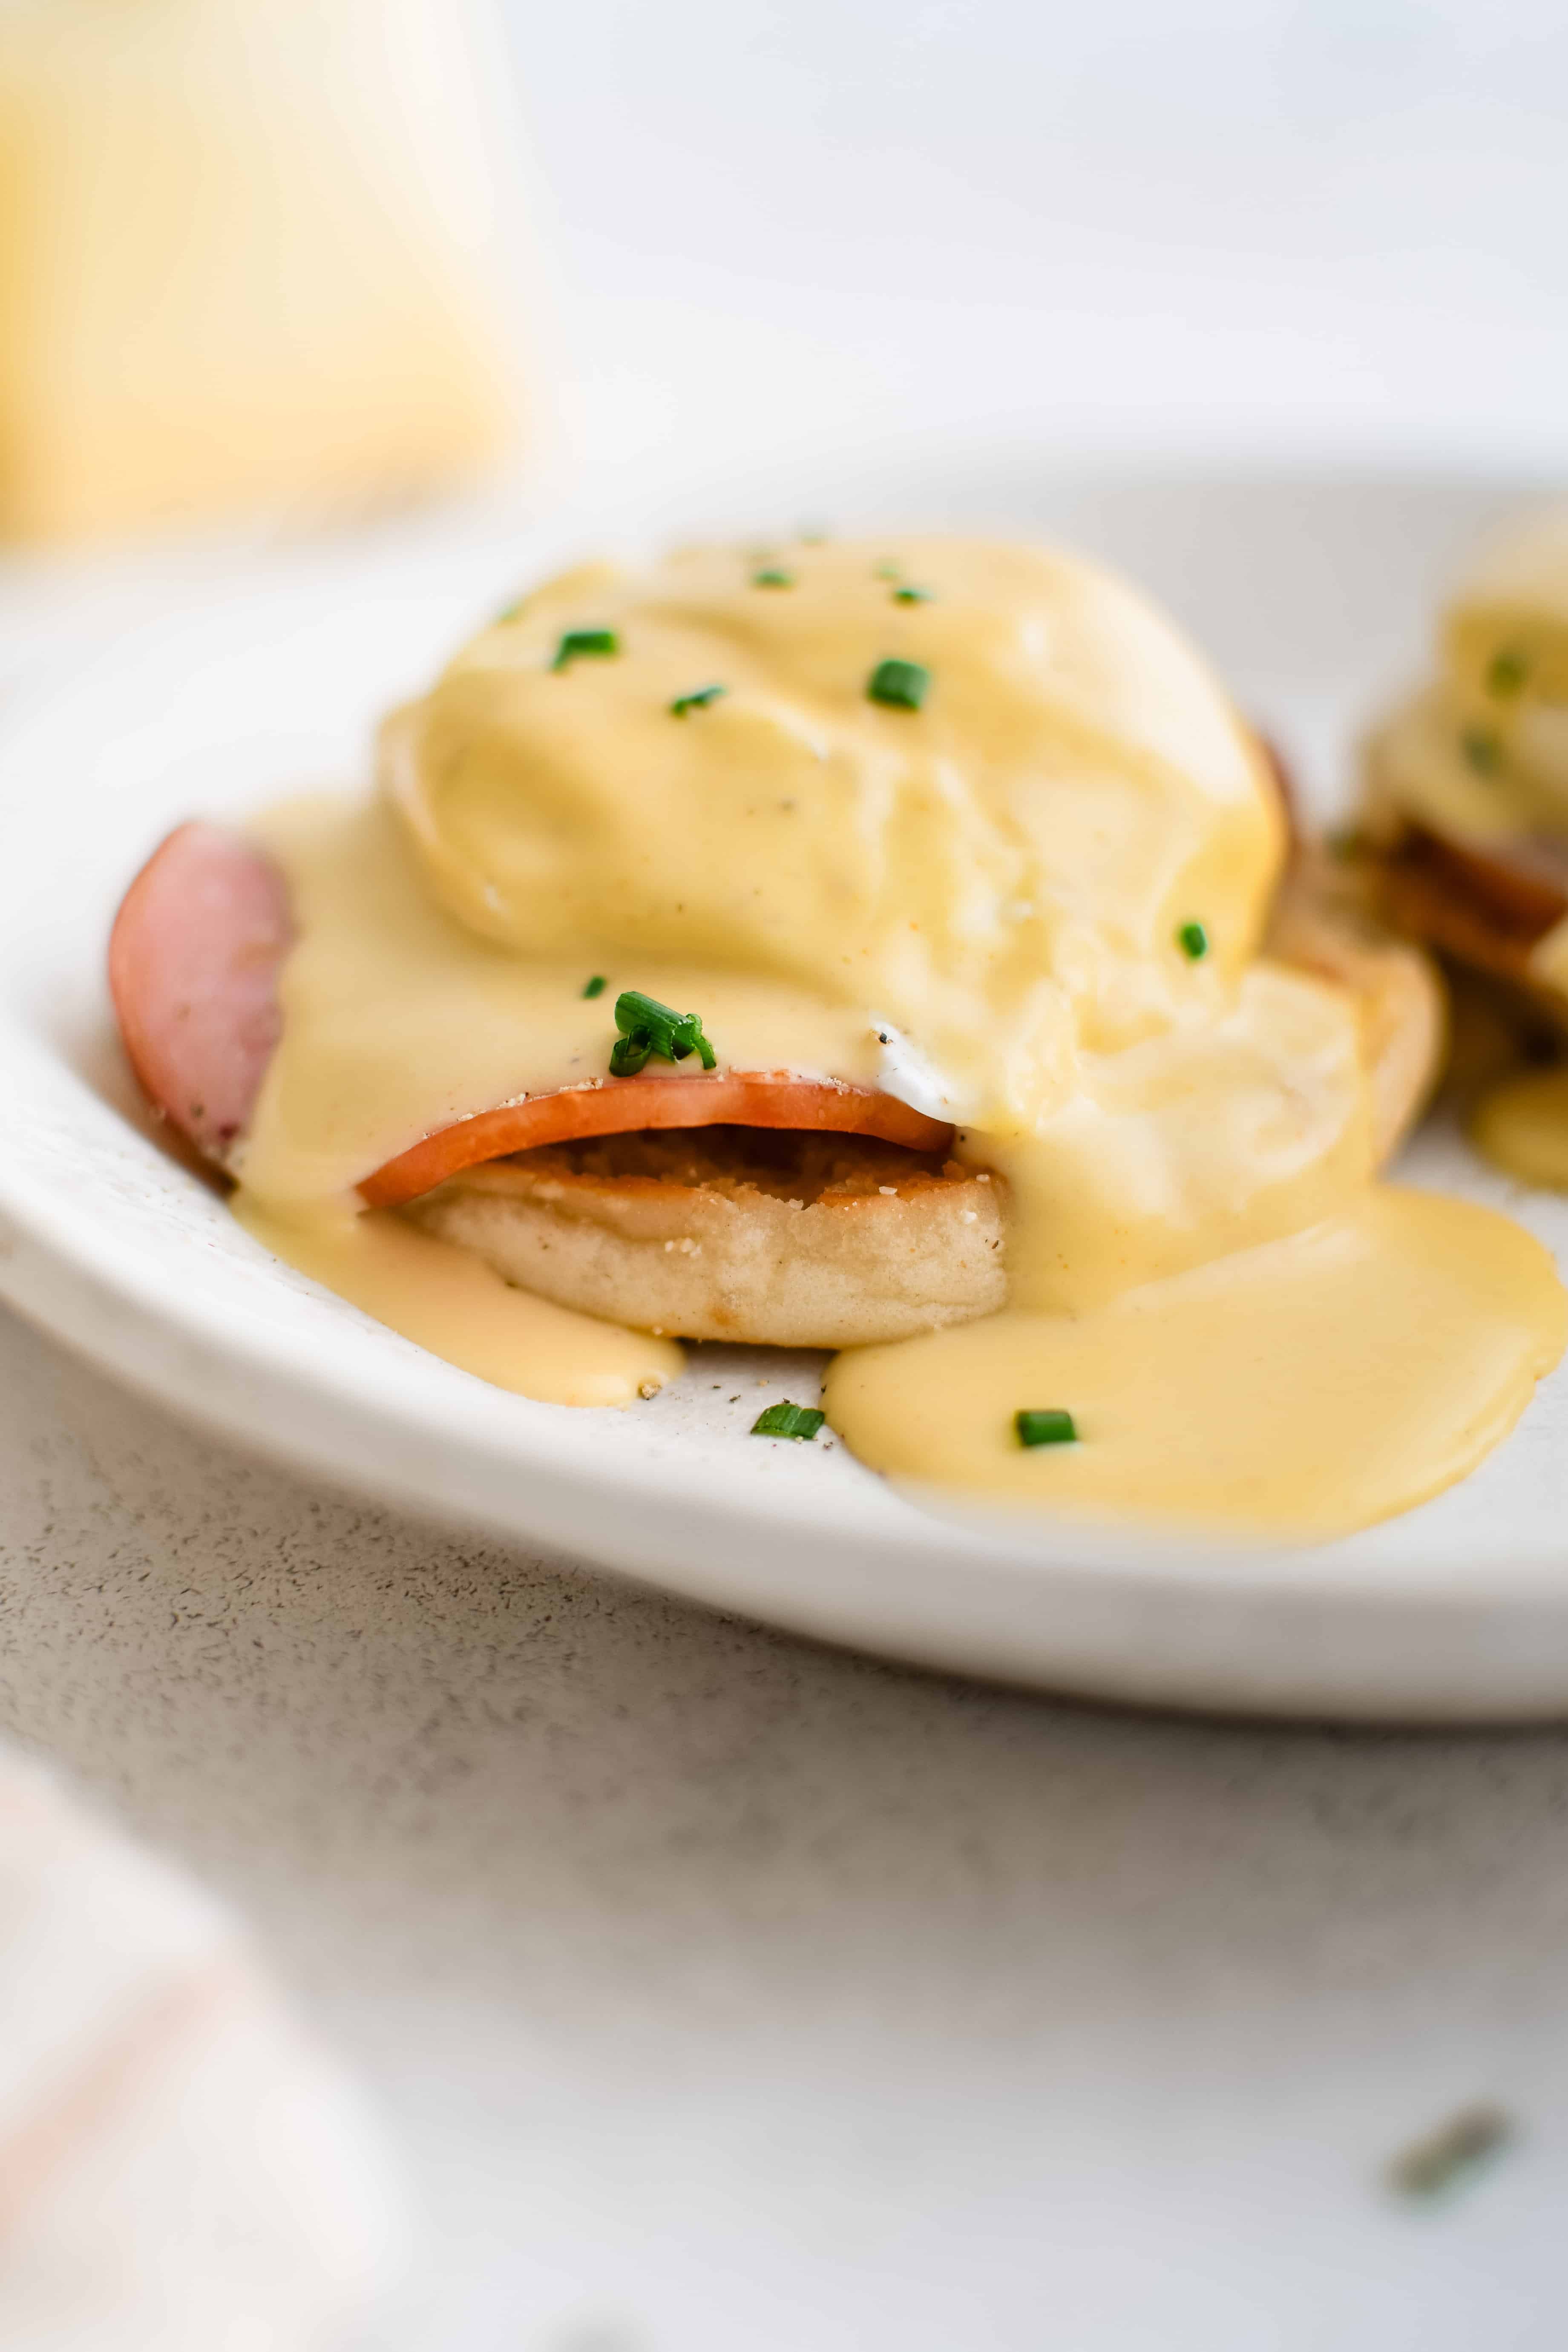 Eggs Benedict with poached egg, Canadian bacon, and hollandaise sauce on an English muffin on a white plate.